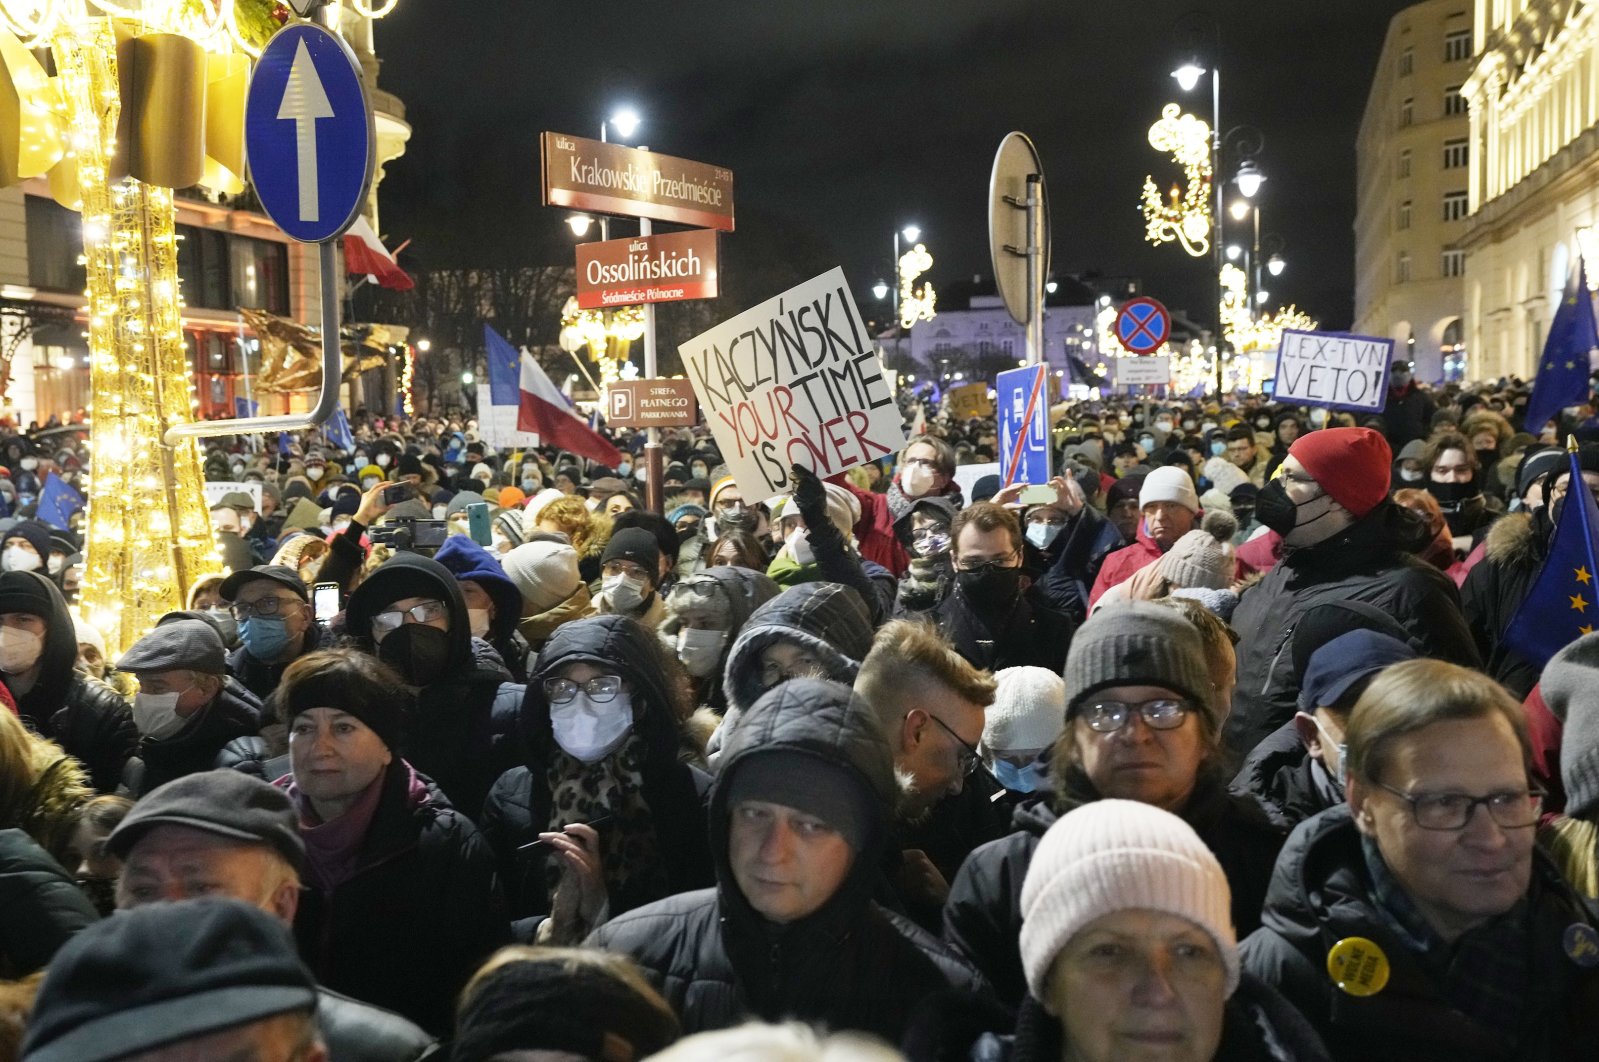 People demonstrate after the Polish parliament approved a bill that is widely viewed as an attack on media freedom, in Warsaw, Poland, Dec. 19, 2021. (AP Photo)